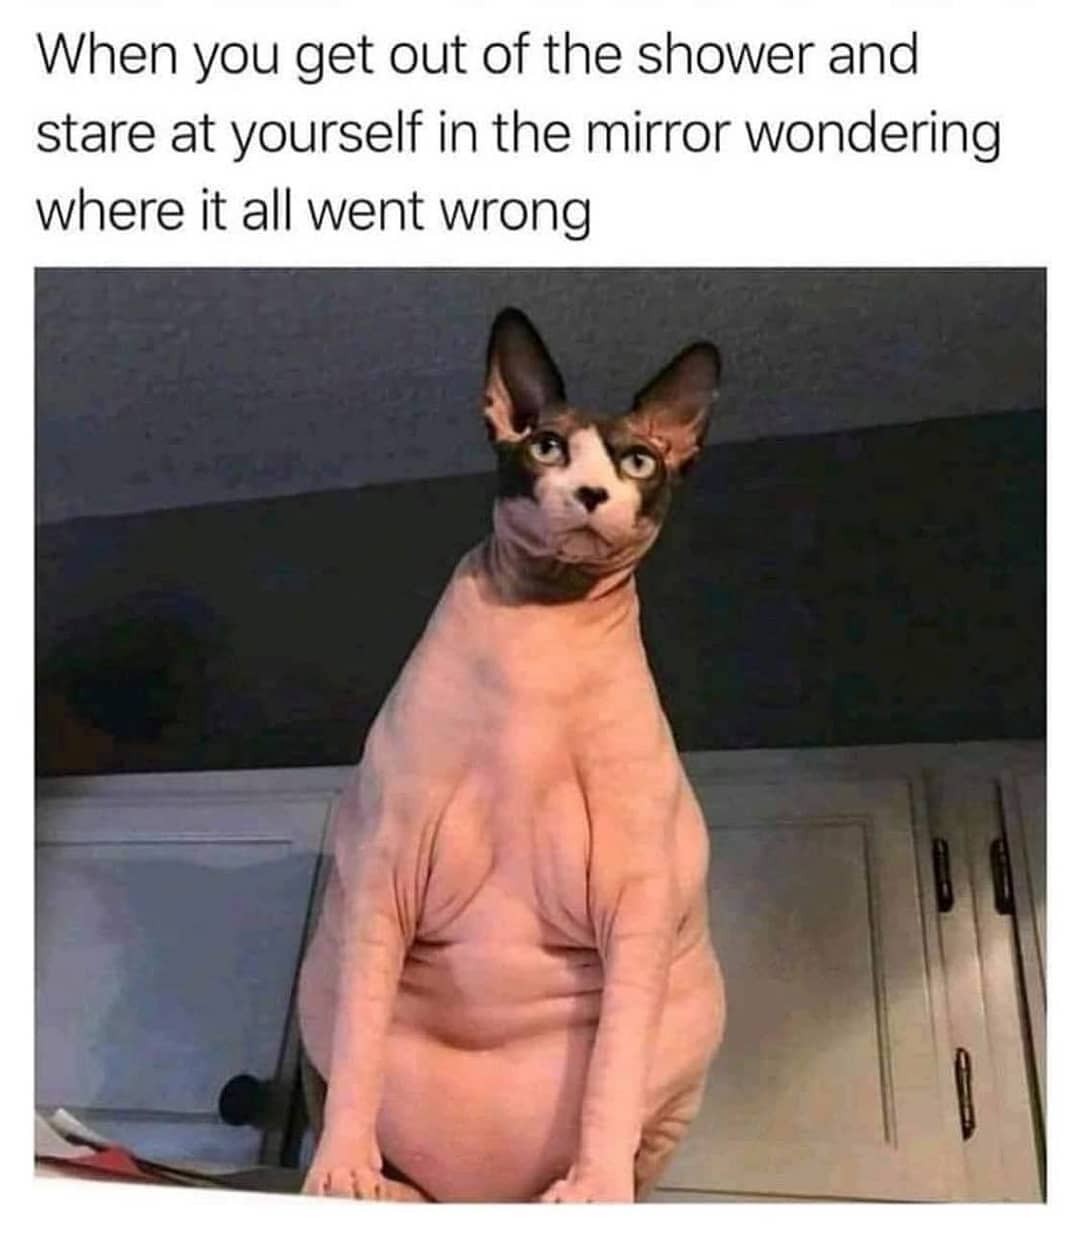 When you get out of the shower and stare at yourself in the mirror wondering where it all went wrong.